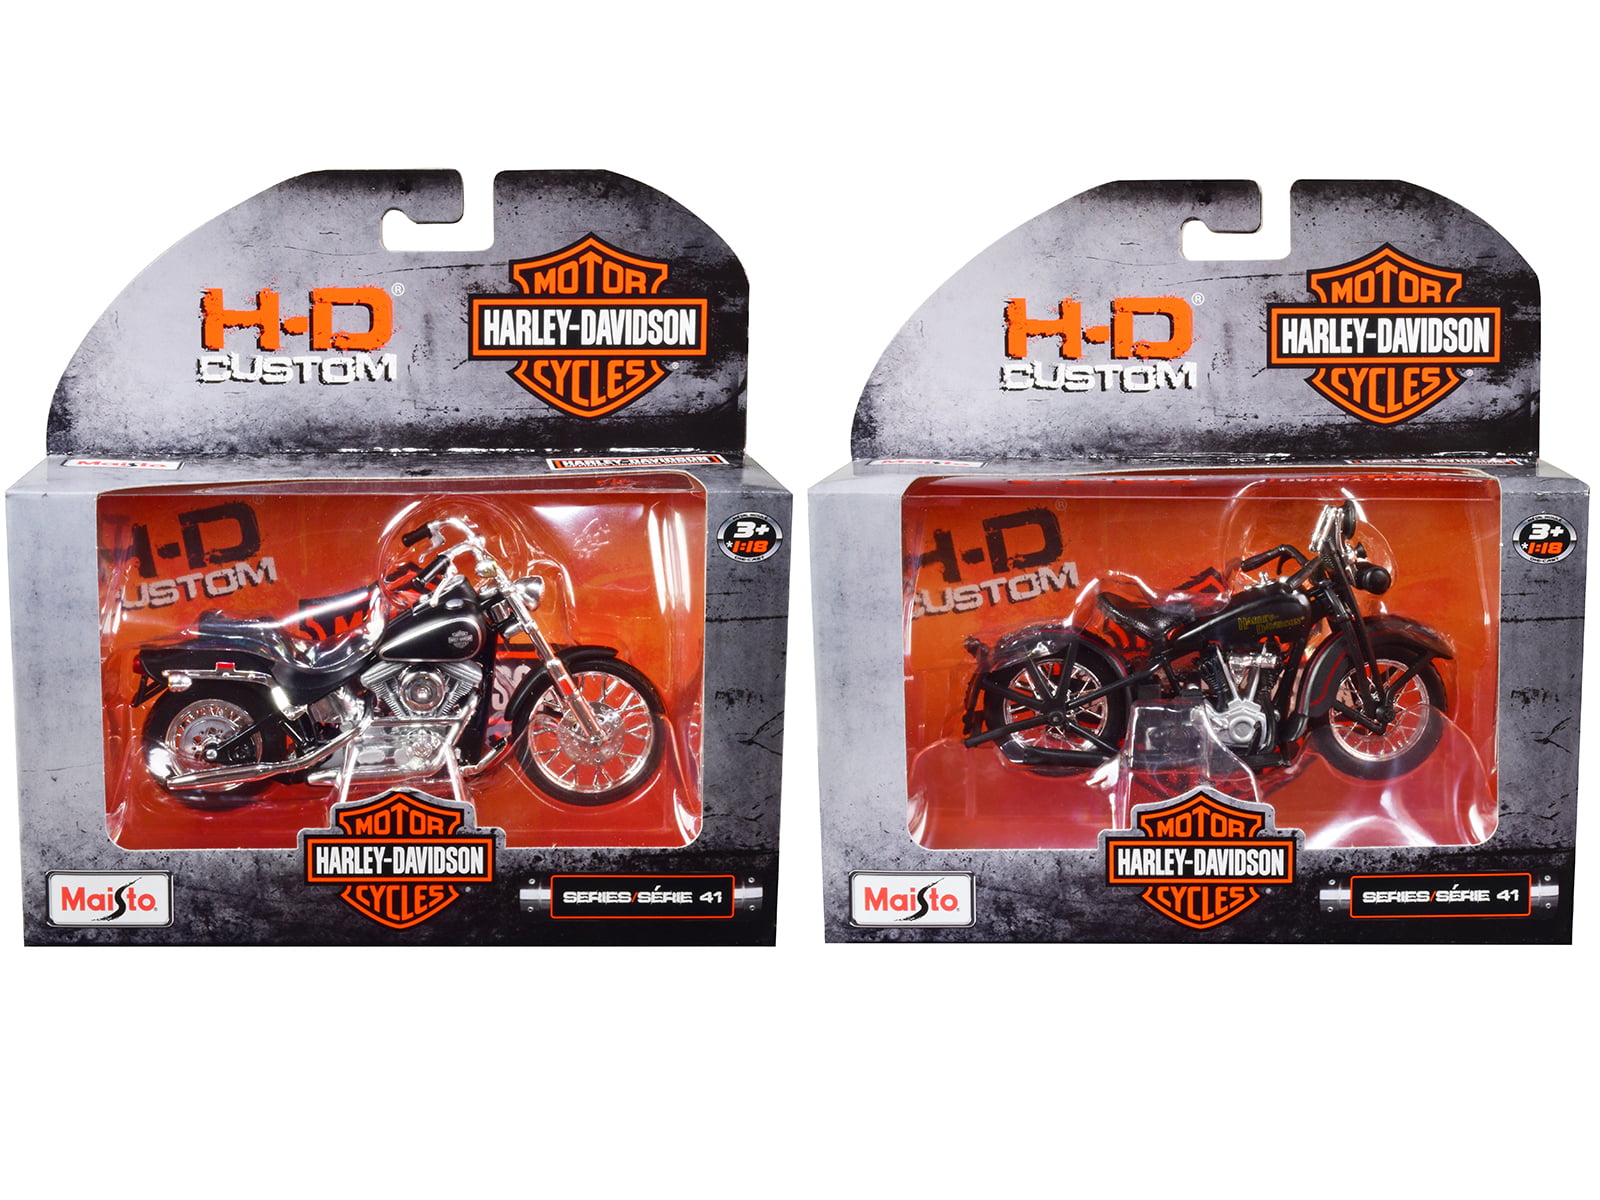 Harley Davidson Miniature Motorcycles lot of 6 - Miniature Dollhouse 1:18  scale